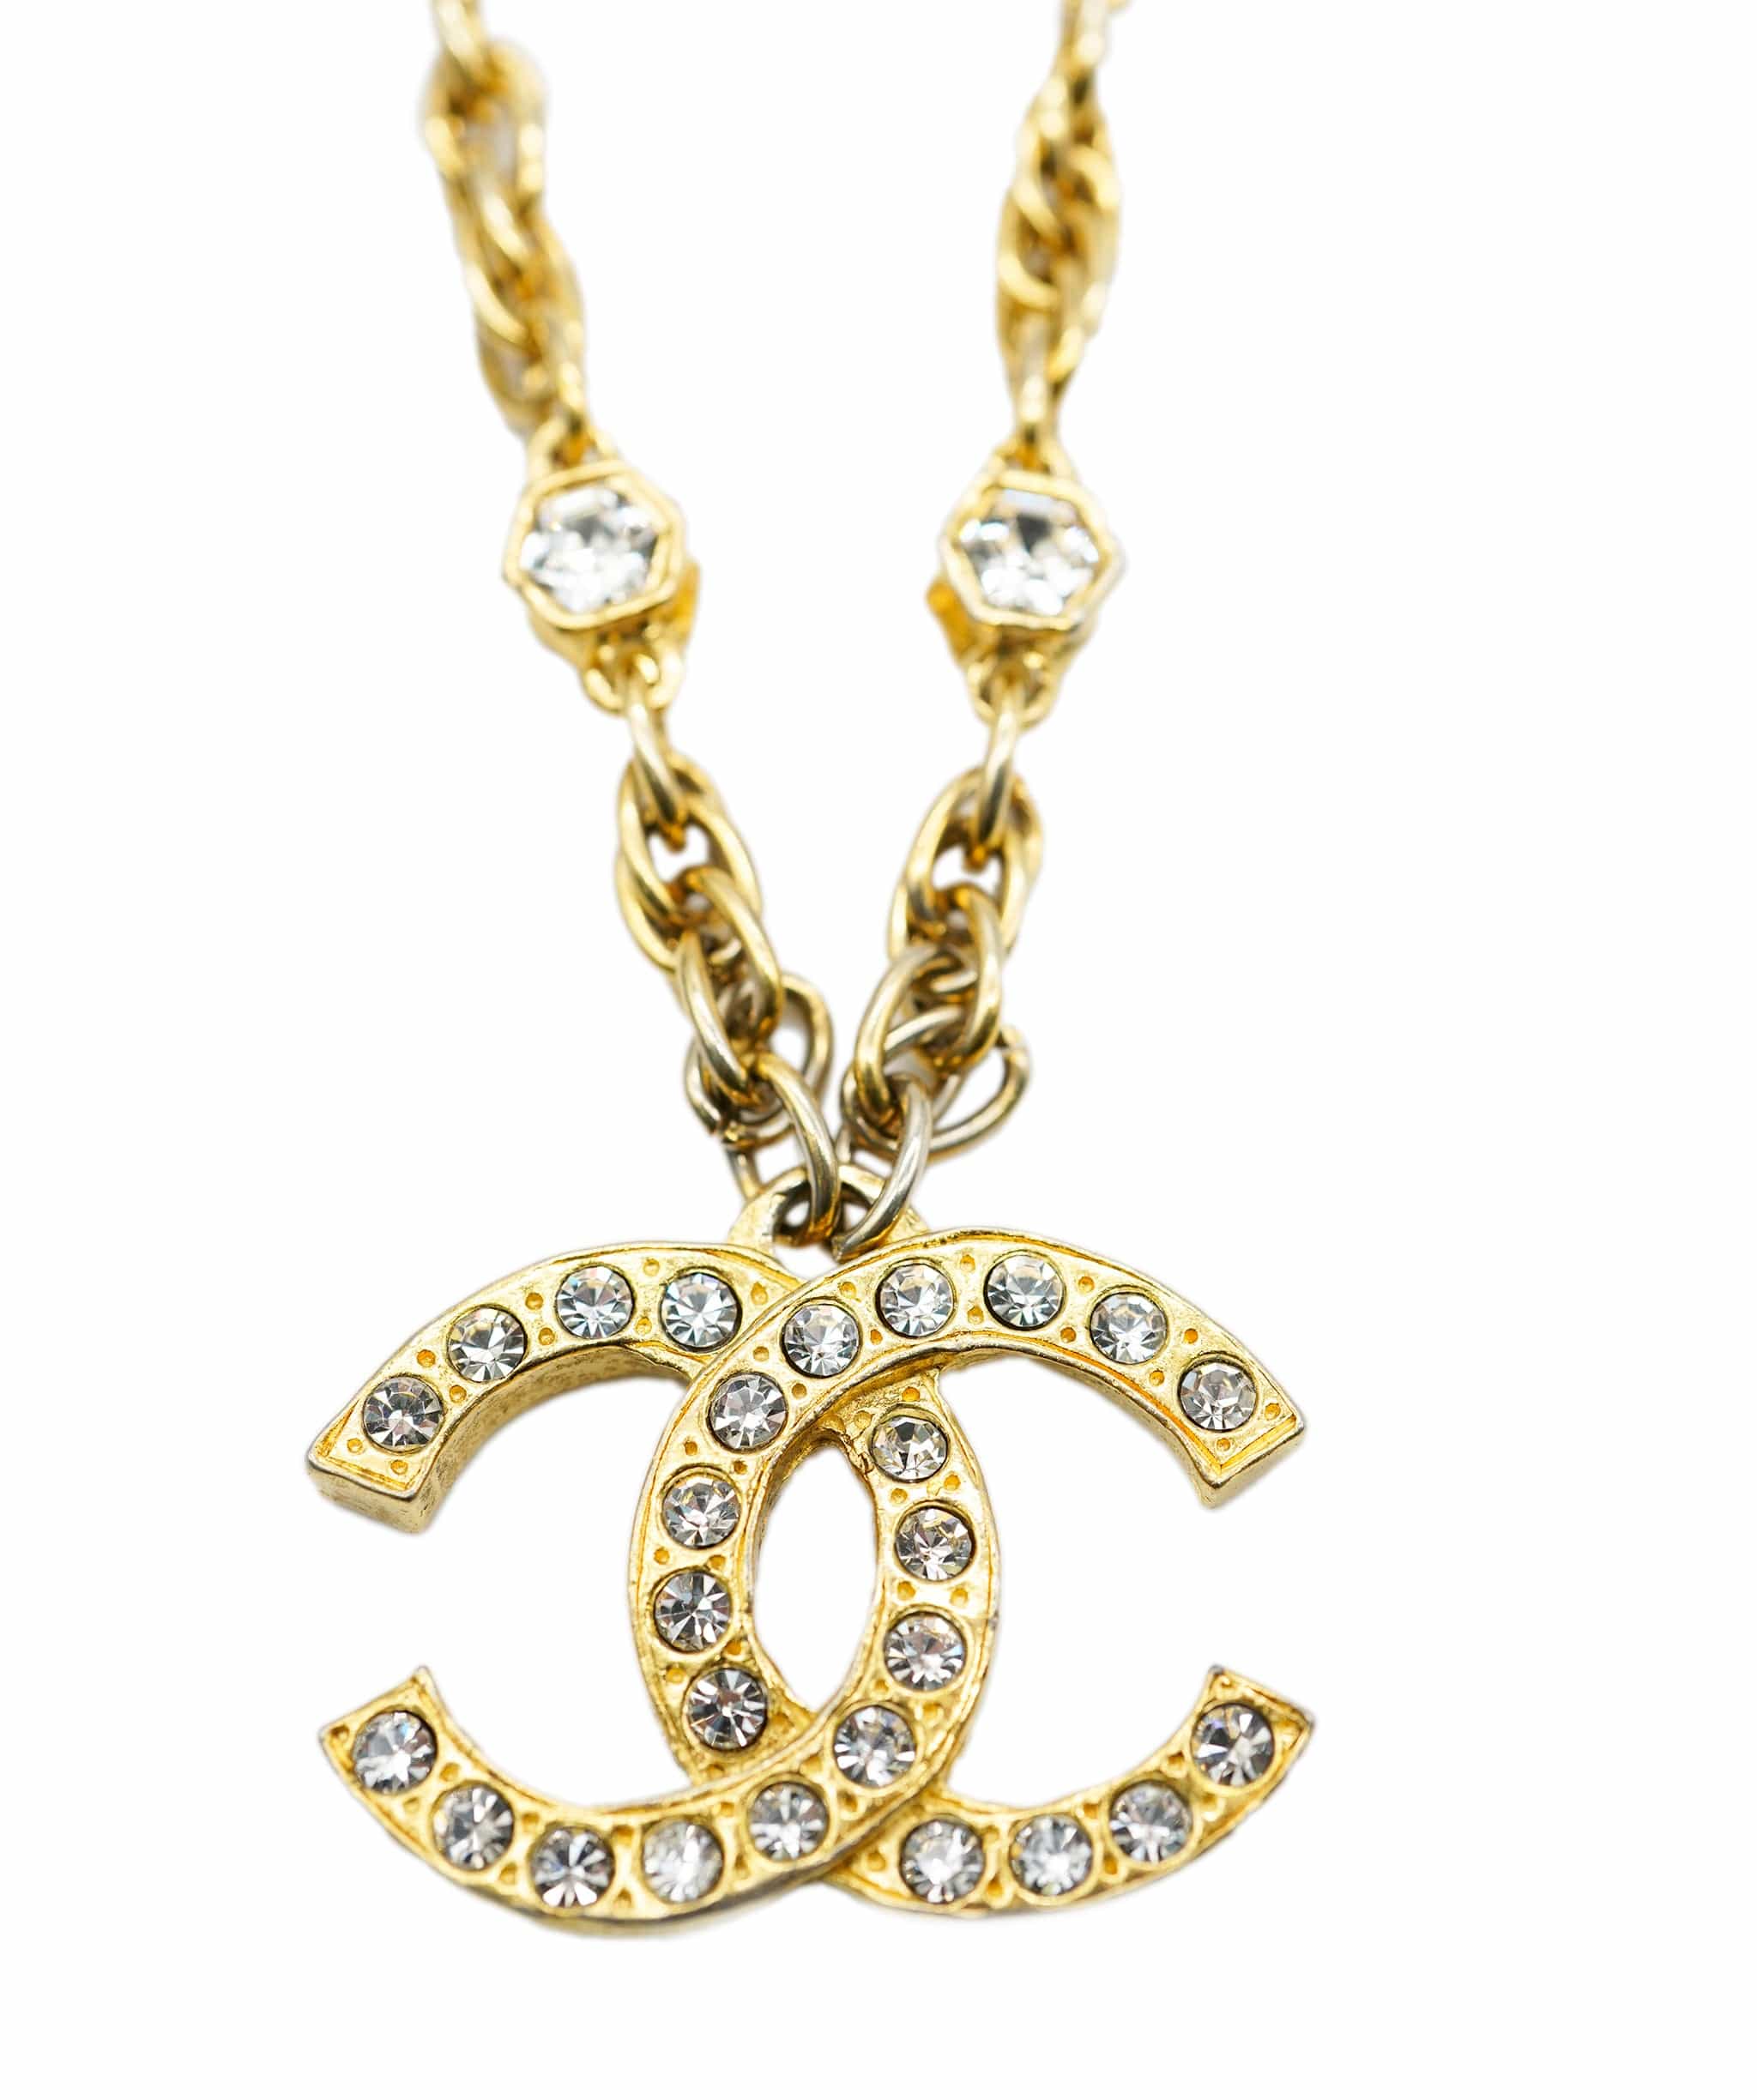 Chanel Chanel crystal CC necklace gold ASC1767